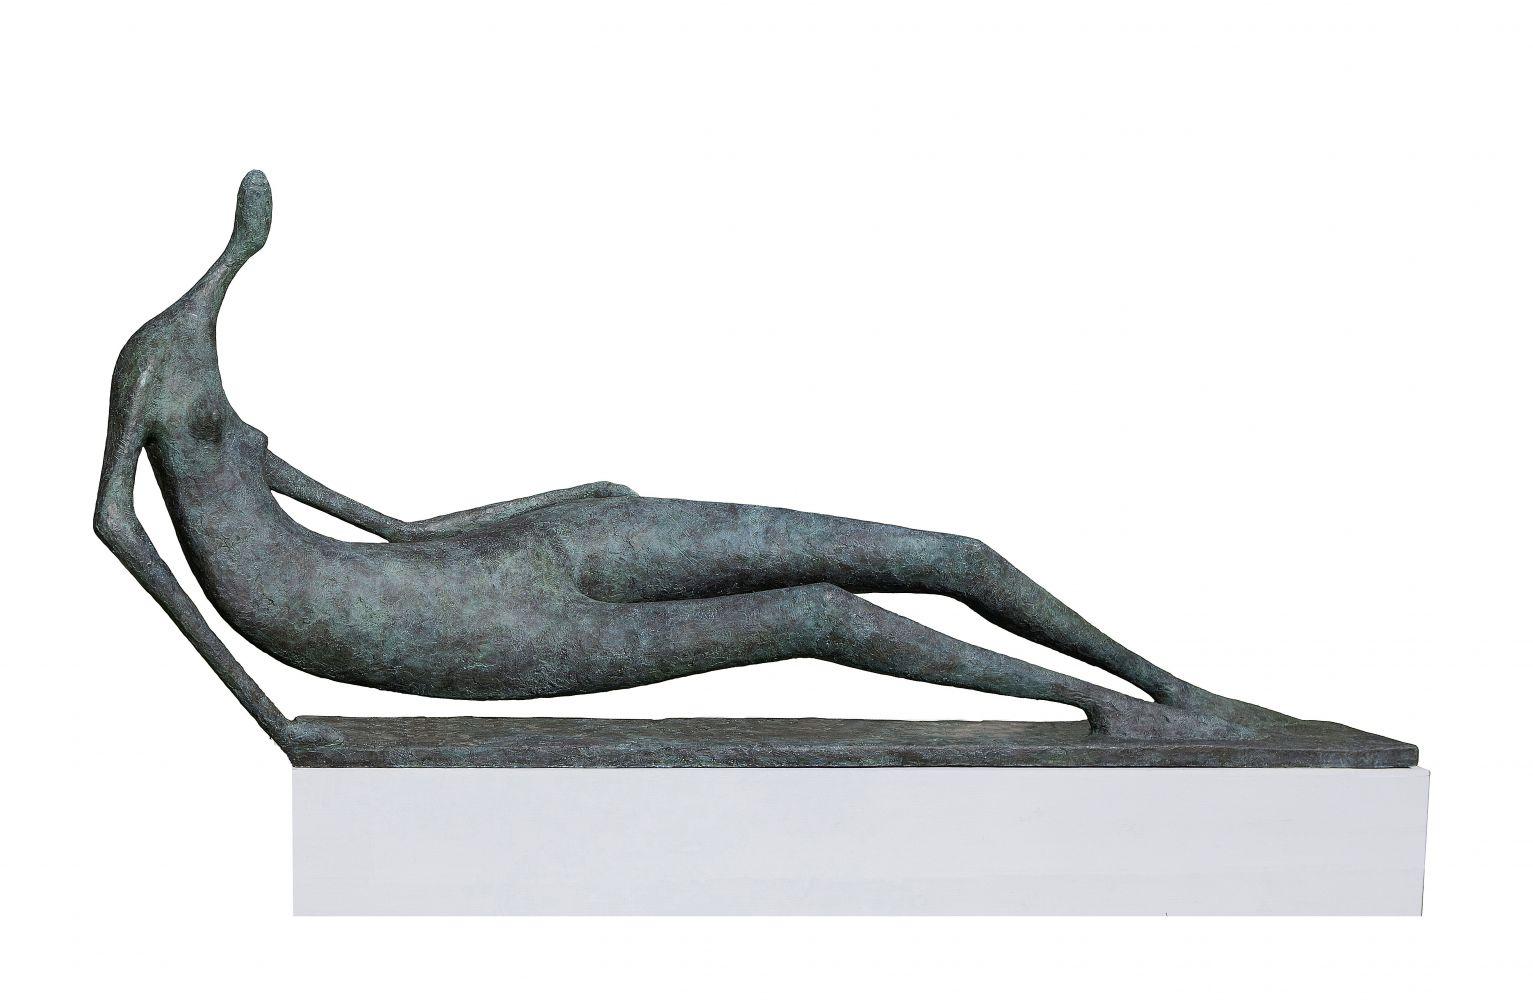 Monumental Lying Figure is a bronze sculpture by French contemporary artist Pierre Yermia, dimensions are 110 × 310 × 60 cm (43.3 × 122 × 23.6 in).  
The sculpture is signed and numbered, it is part of a limited edition of 8 editions + 4 artist’s